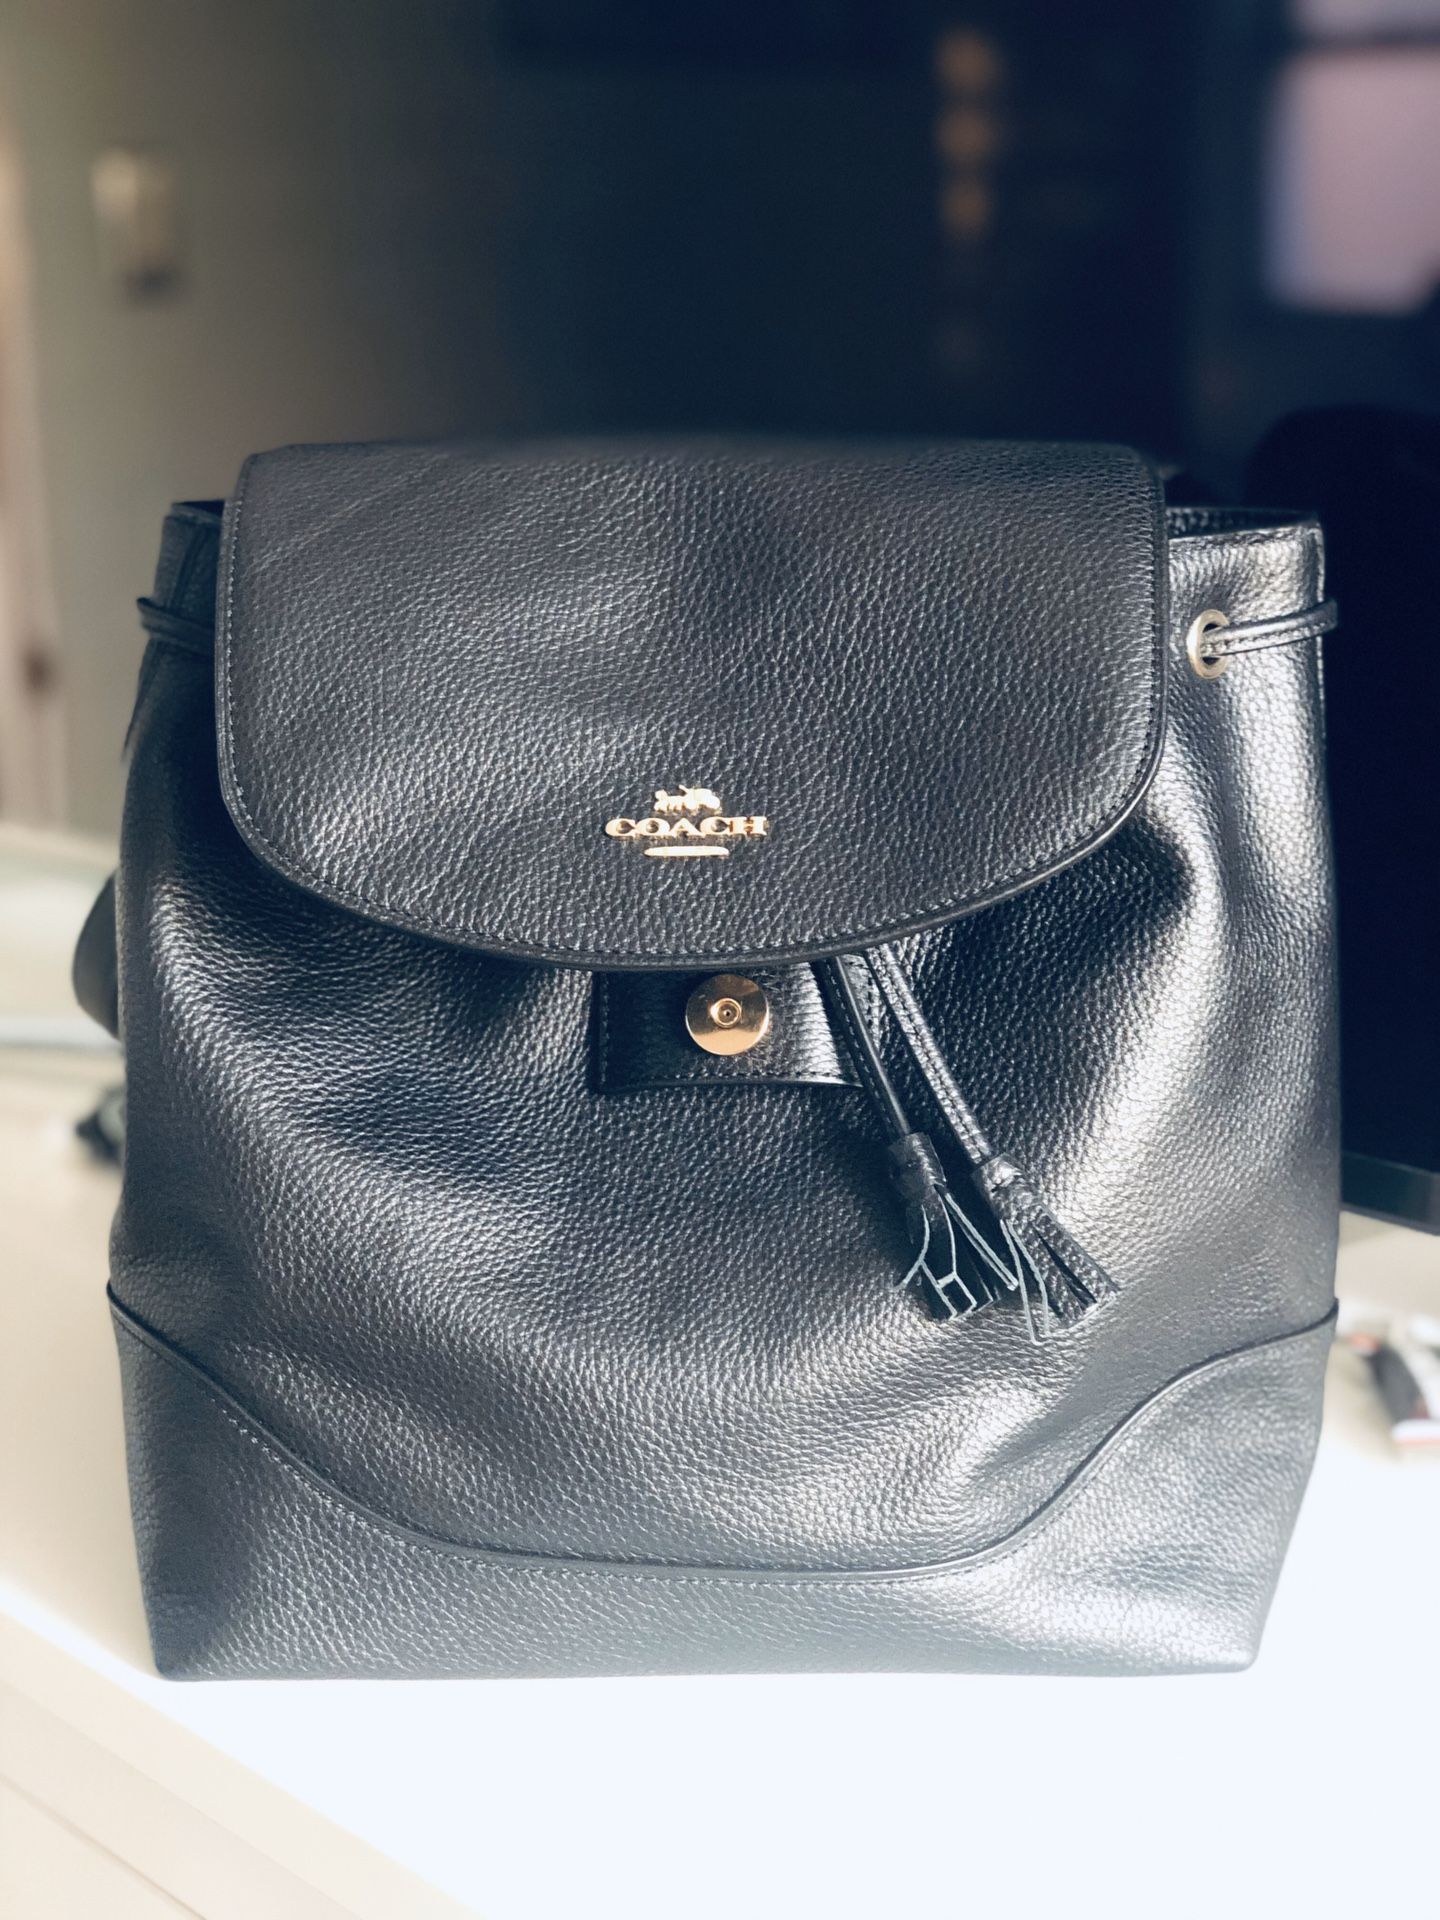 New backpack coach in black